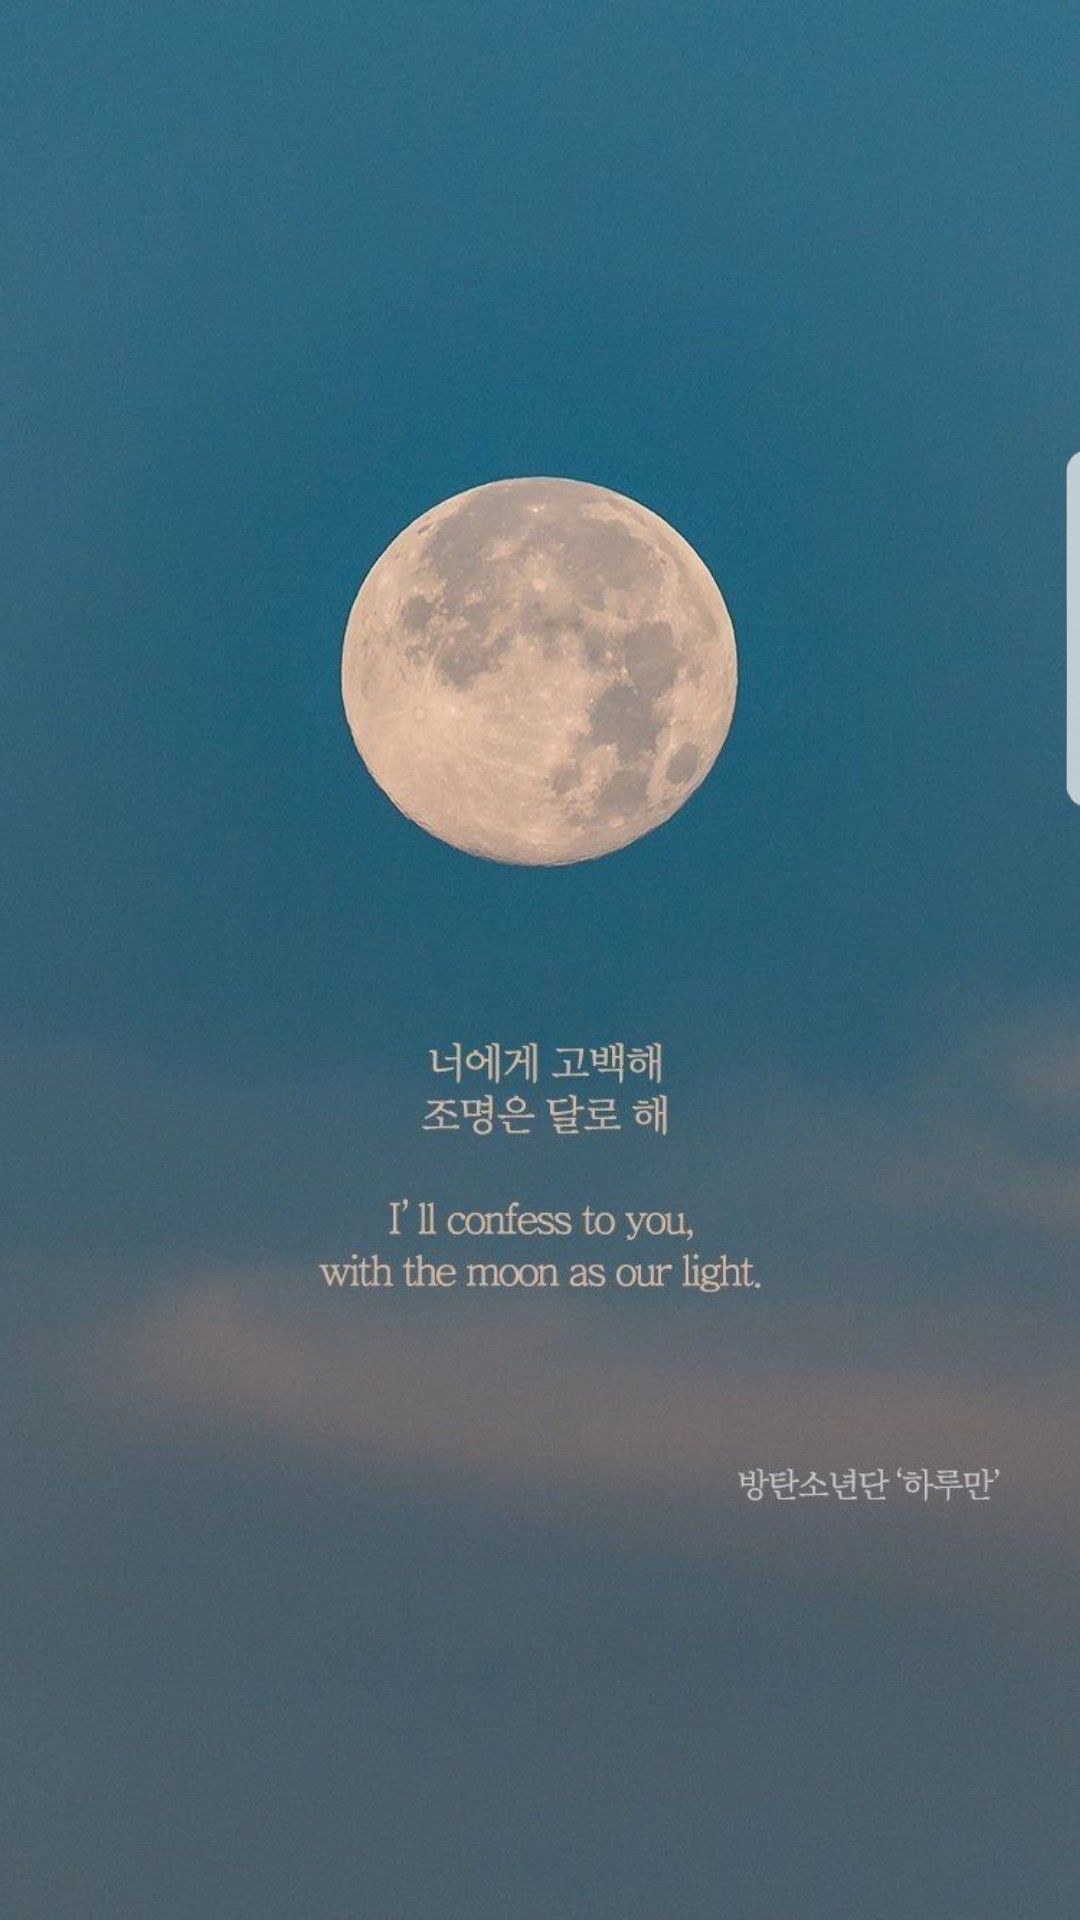 Aesthetic Bts Quotes , HD Wallpaper & Backgrounds